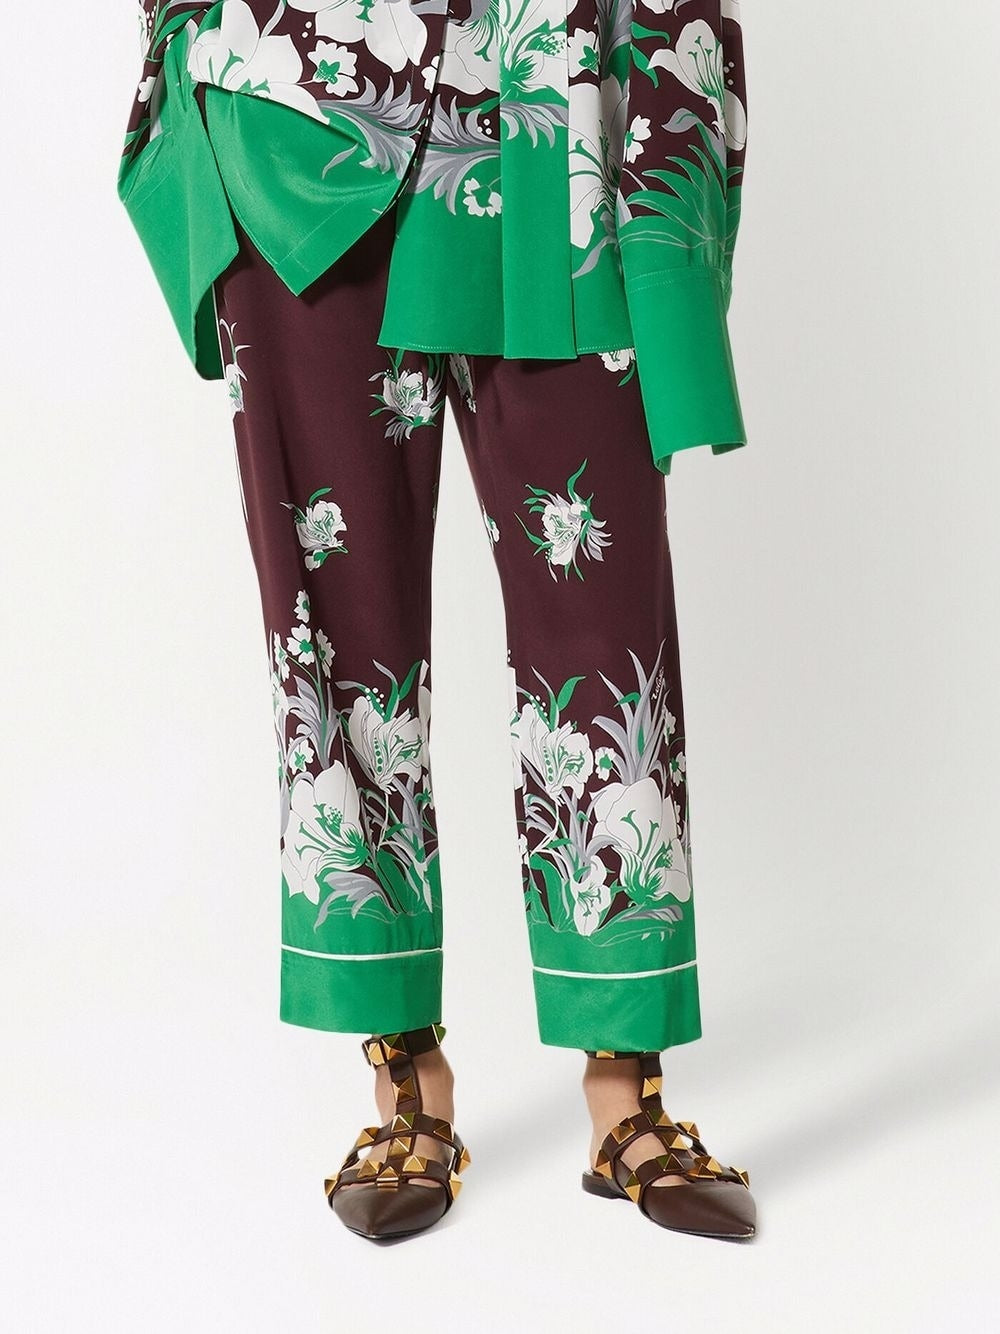 Brown/green silk floral pattern palazzo trousers